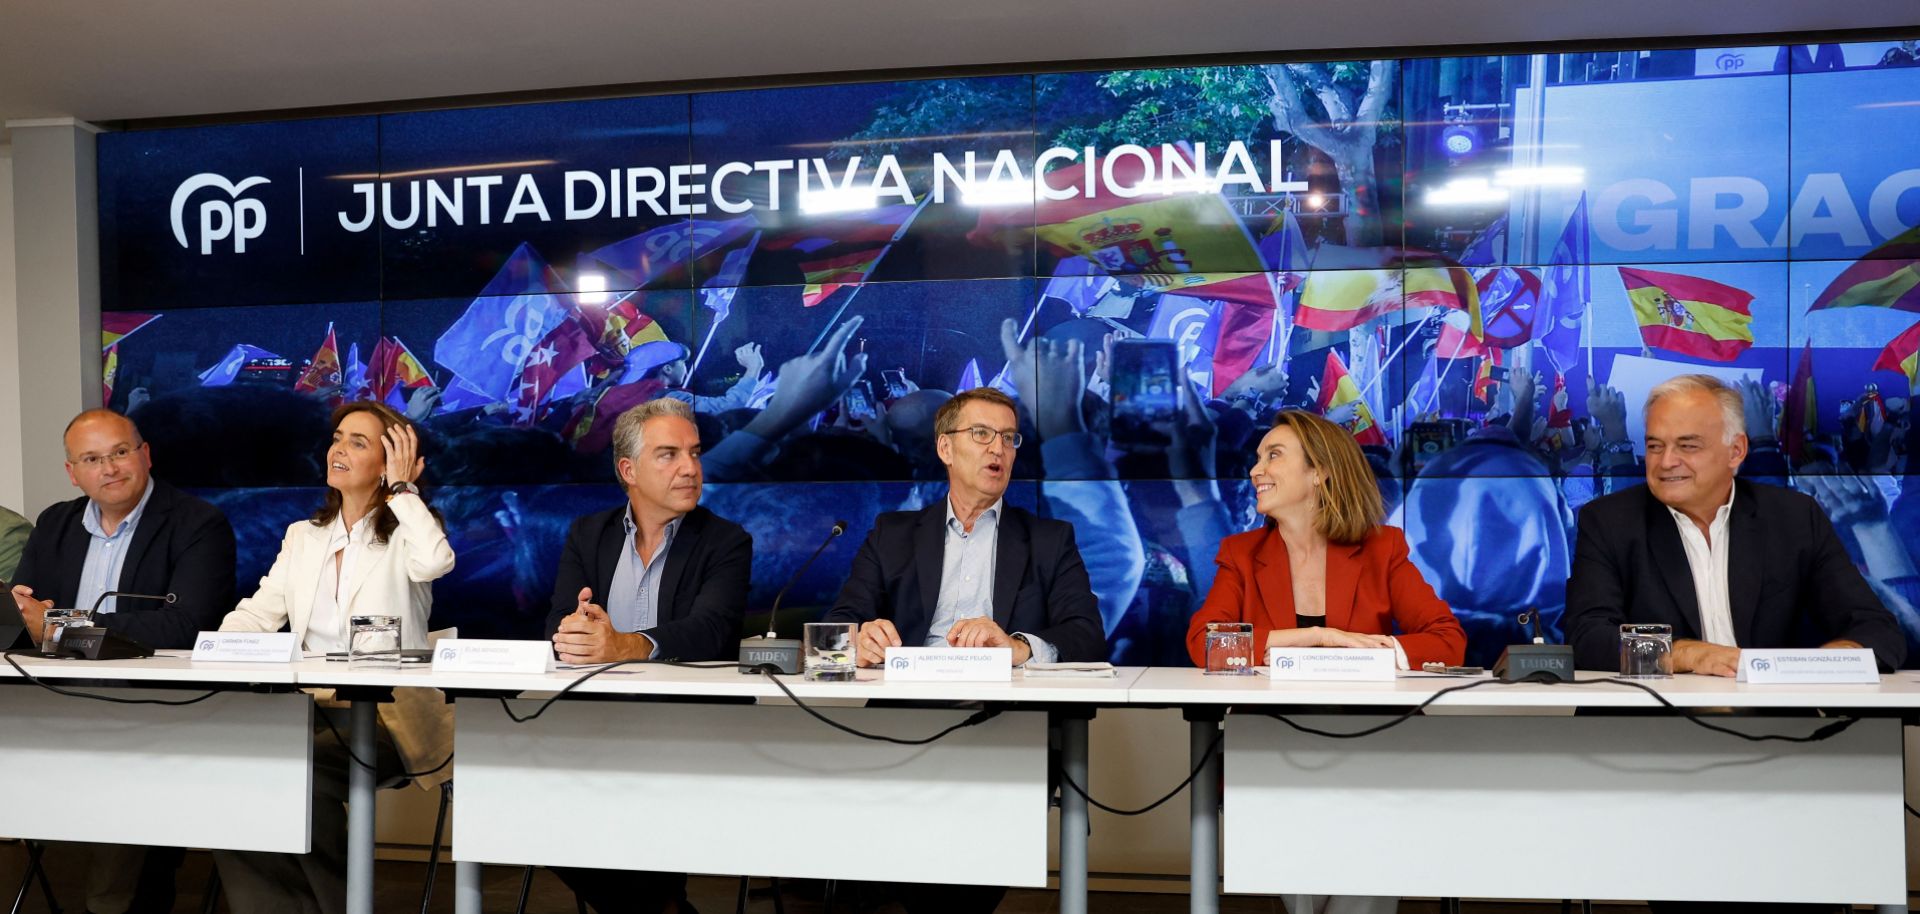 The leader of Spain's center-right People's Party, Alberto Nunez Feijoo (center), and other top party officials answer questions during a post-election press conference in Madrid on July 24, 2023.